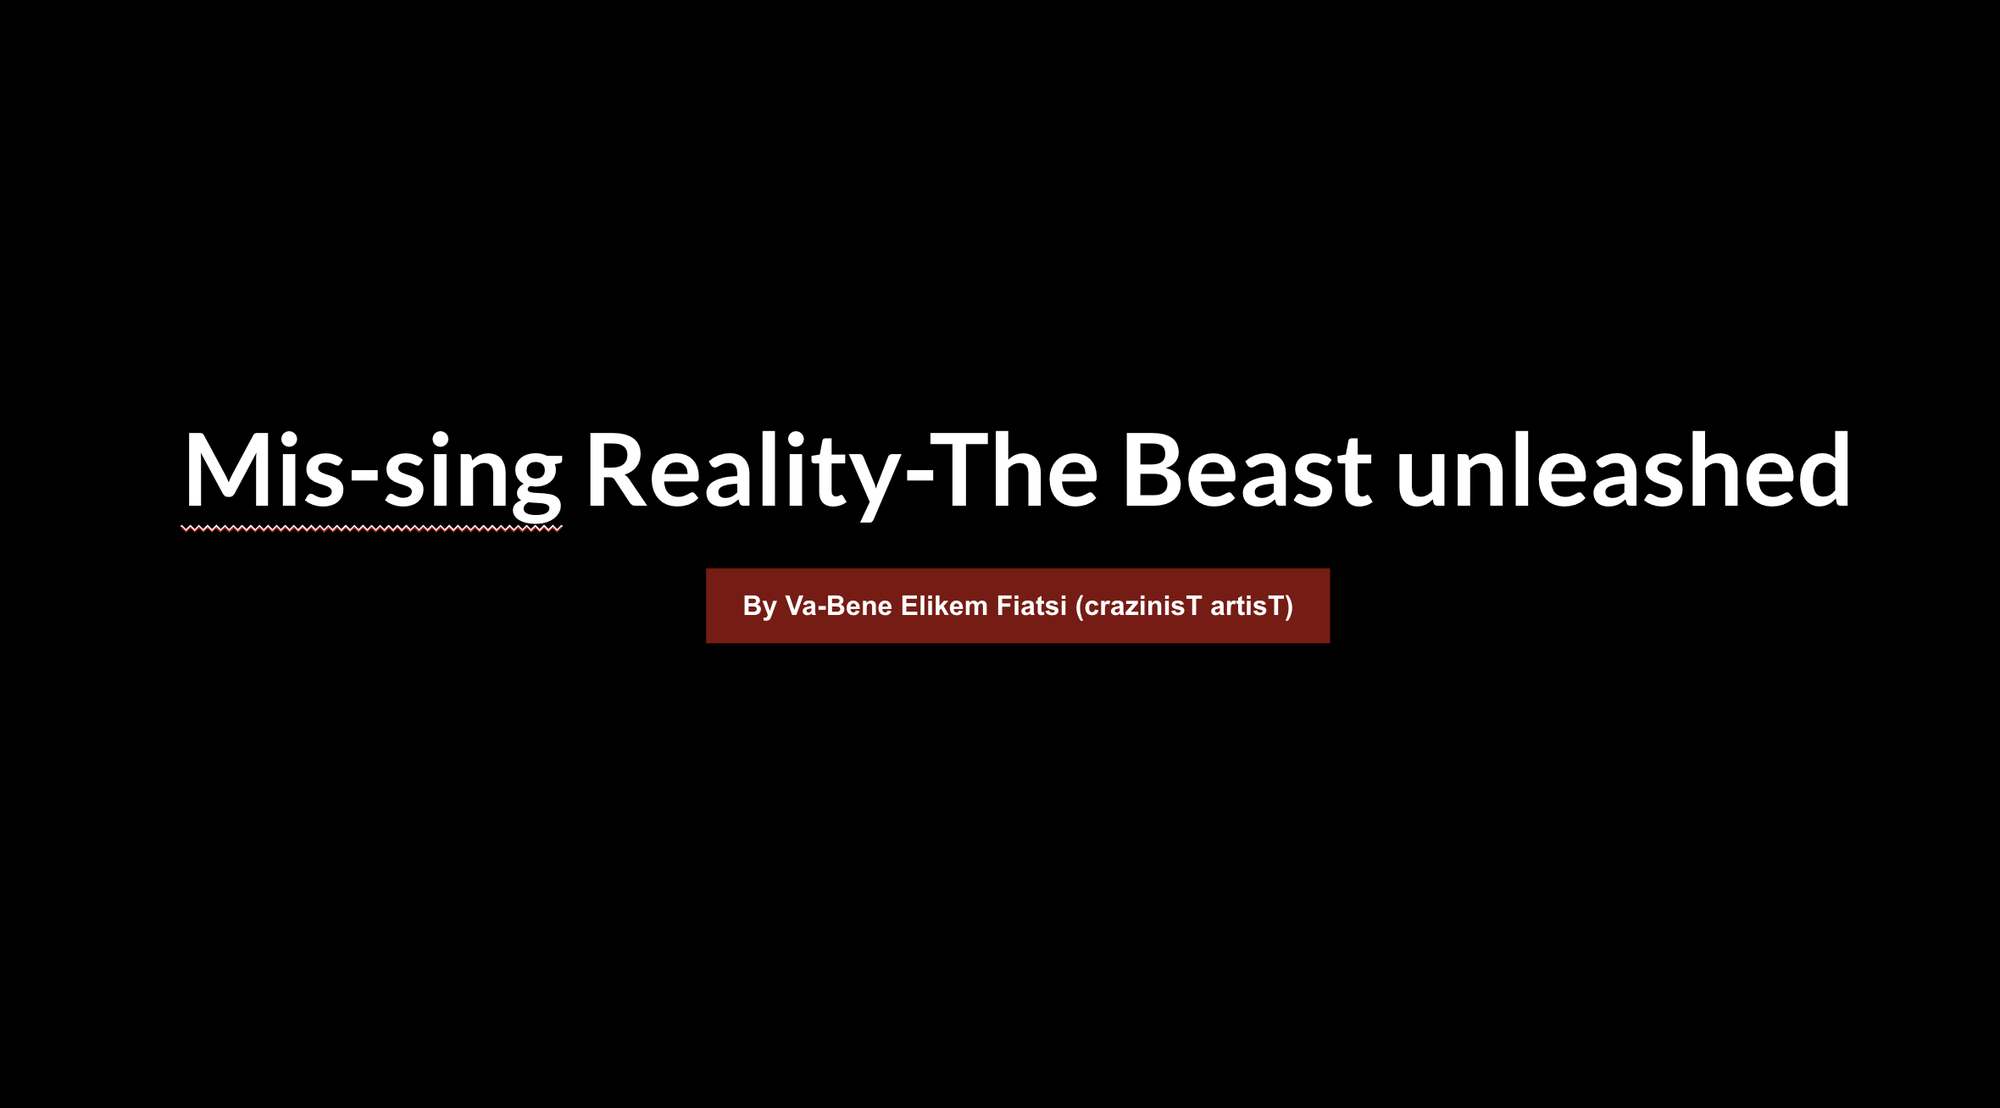 Mis-sing Reality-The Beast unleashed